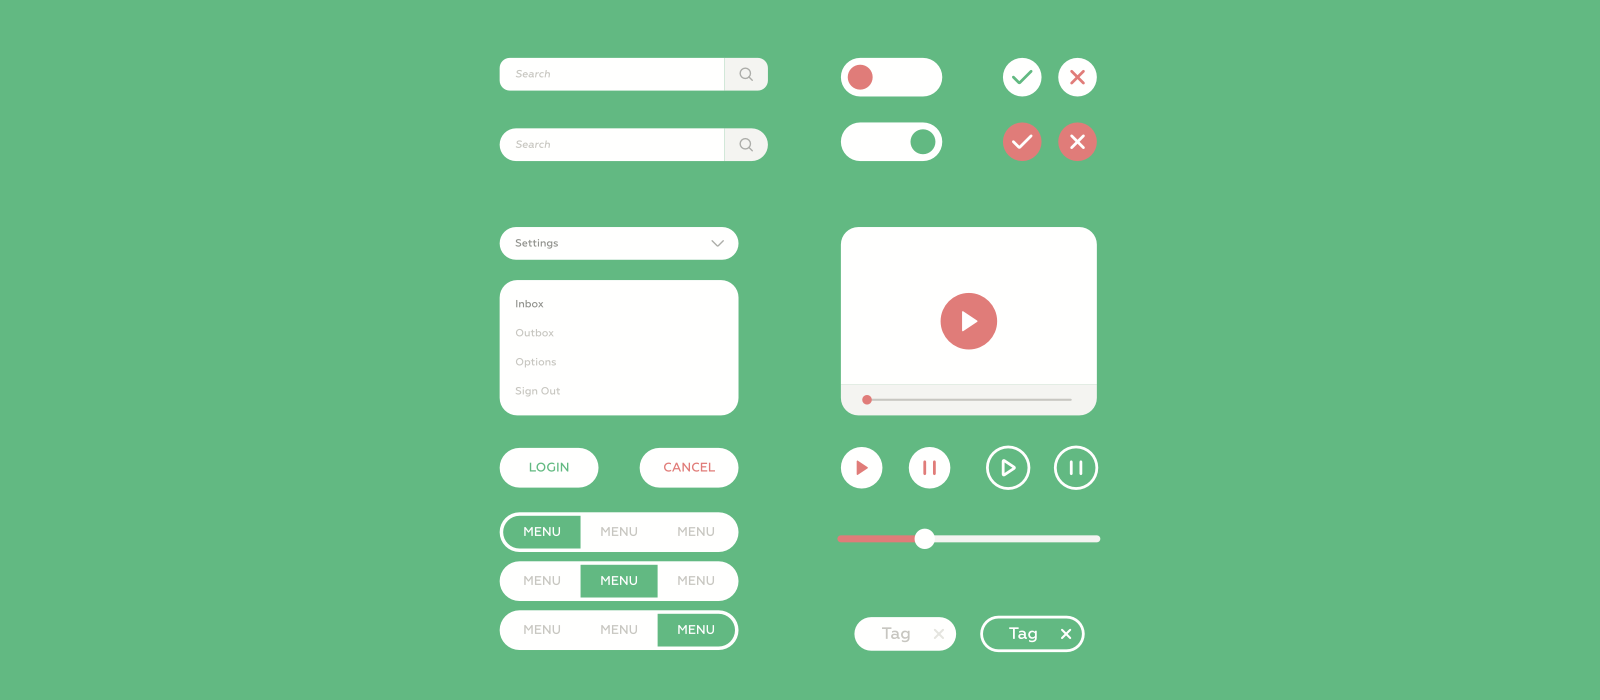 Disney’s Motion Principles in Designing Interface Animations